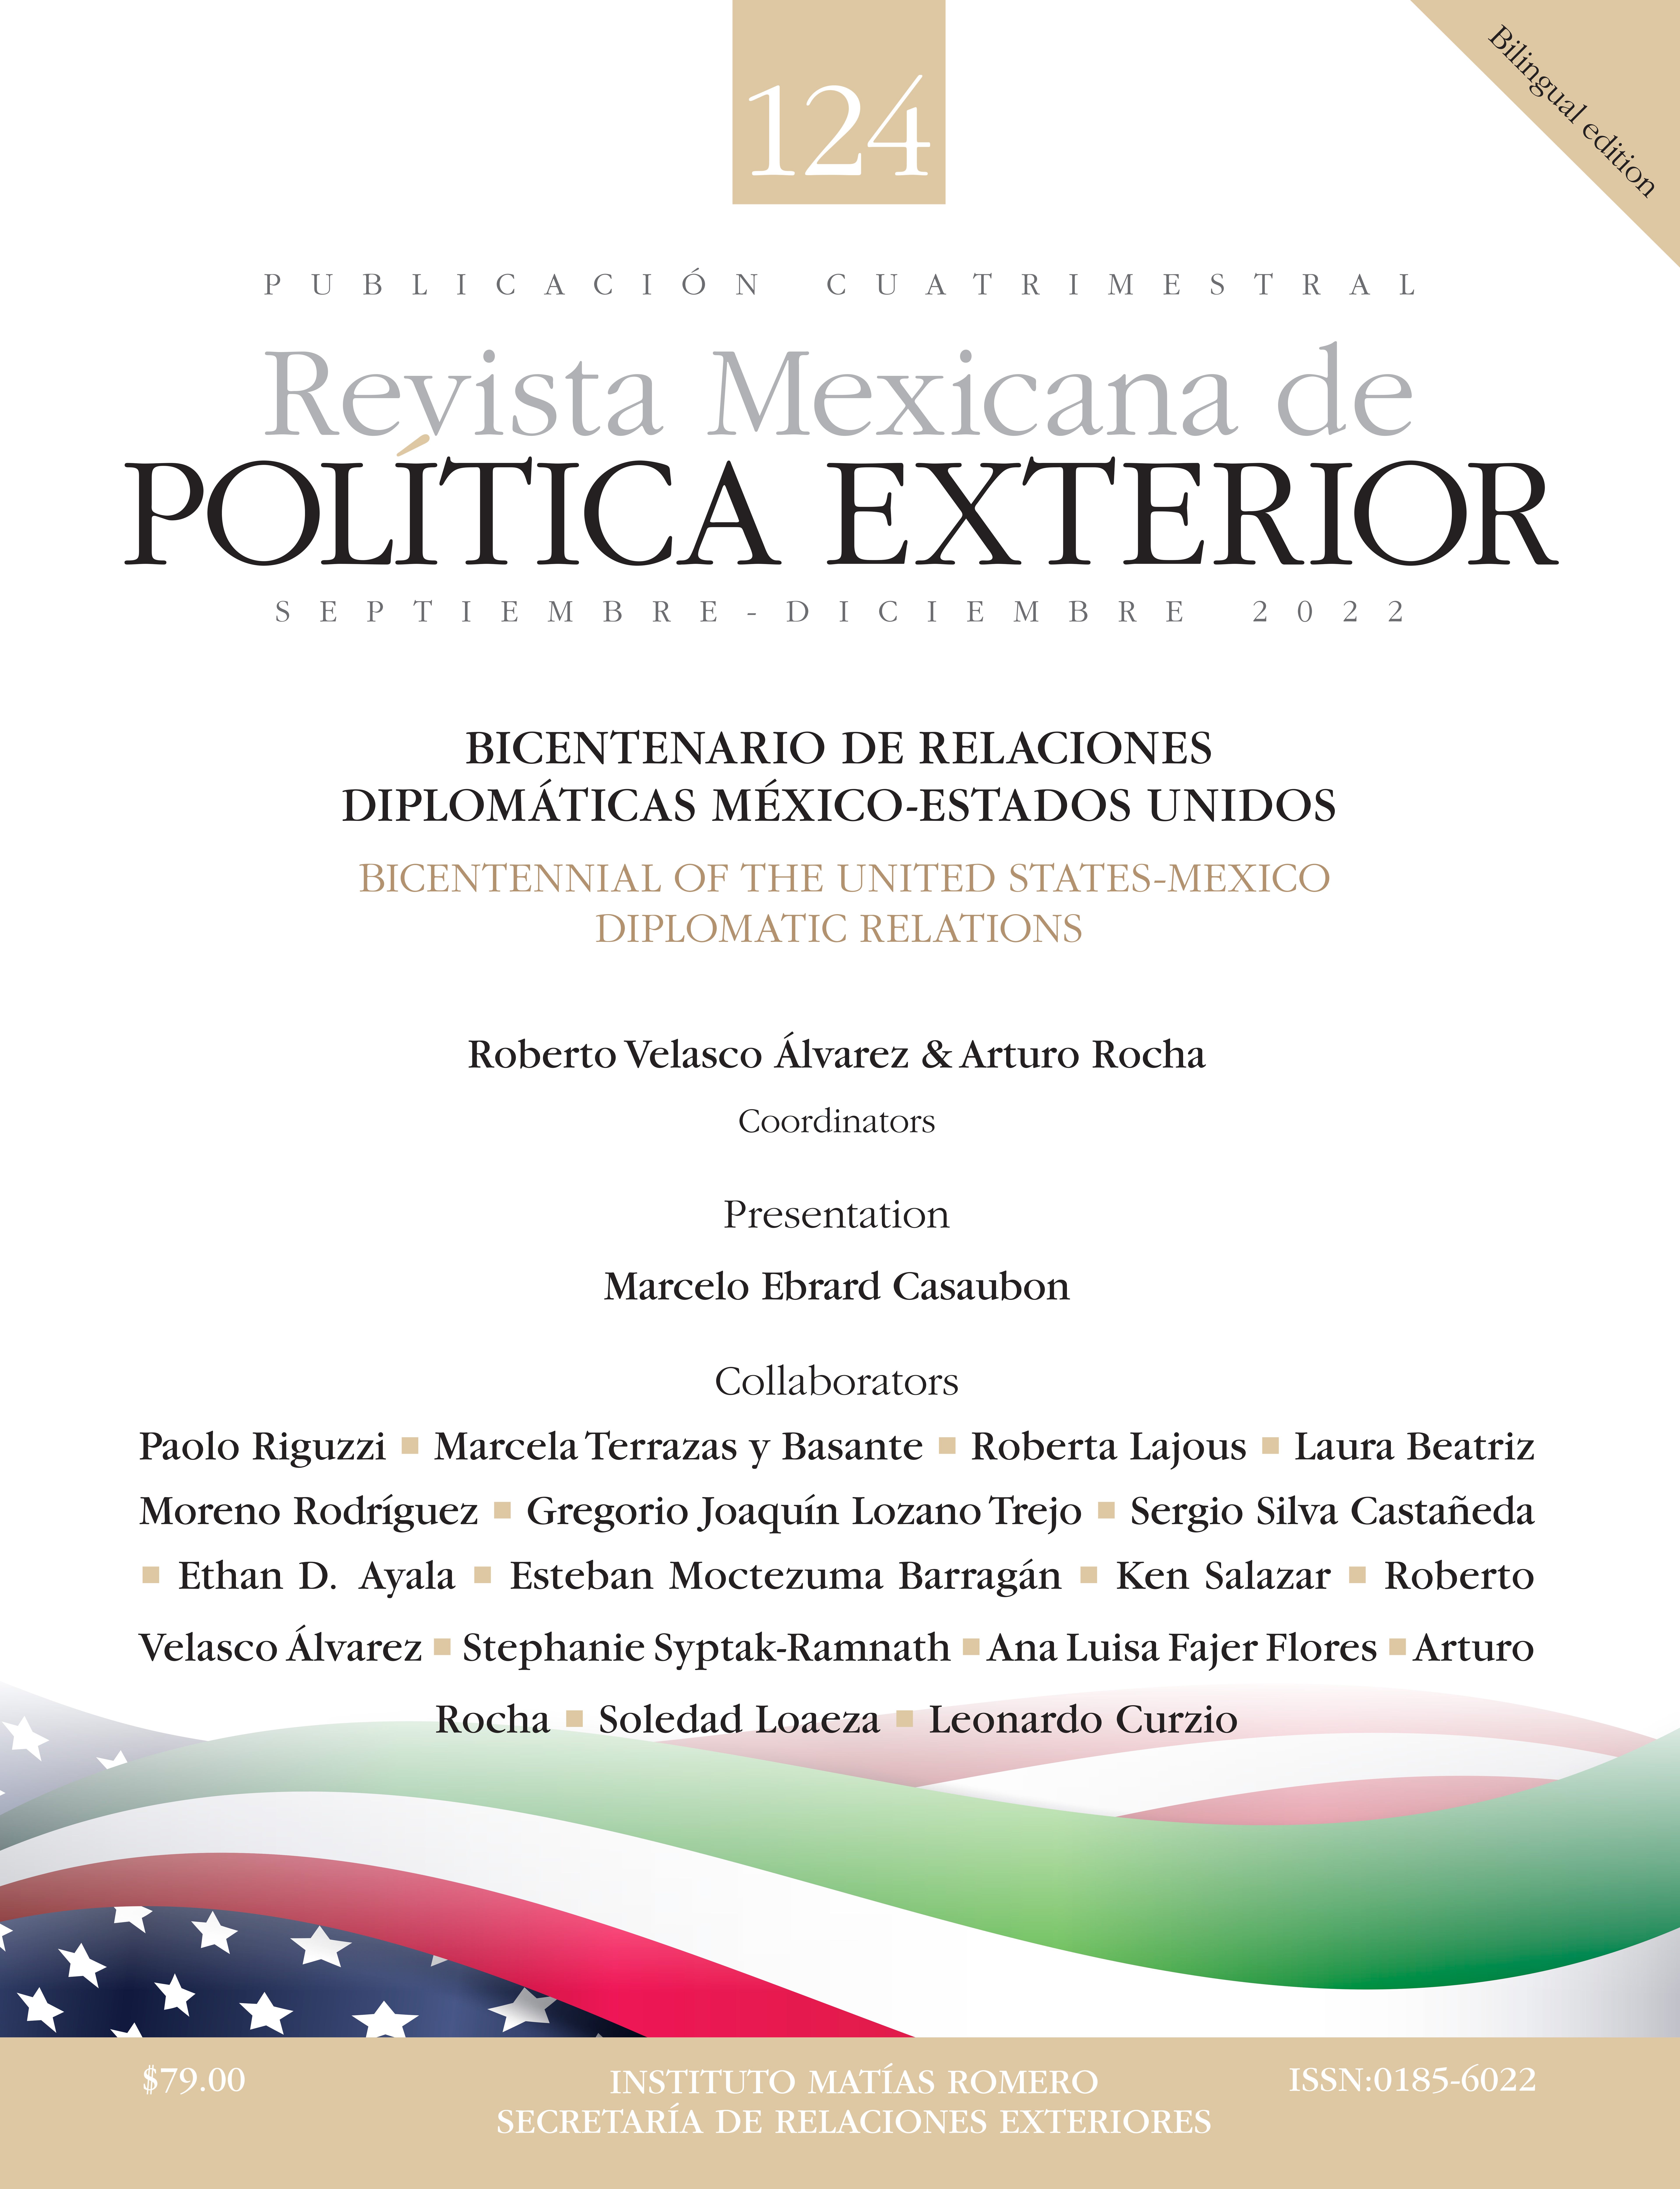 Bicentennial of the United States-Mexico Diplomatic Relations